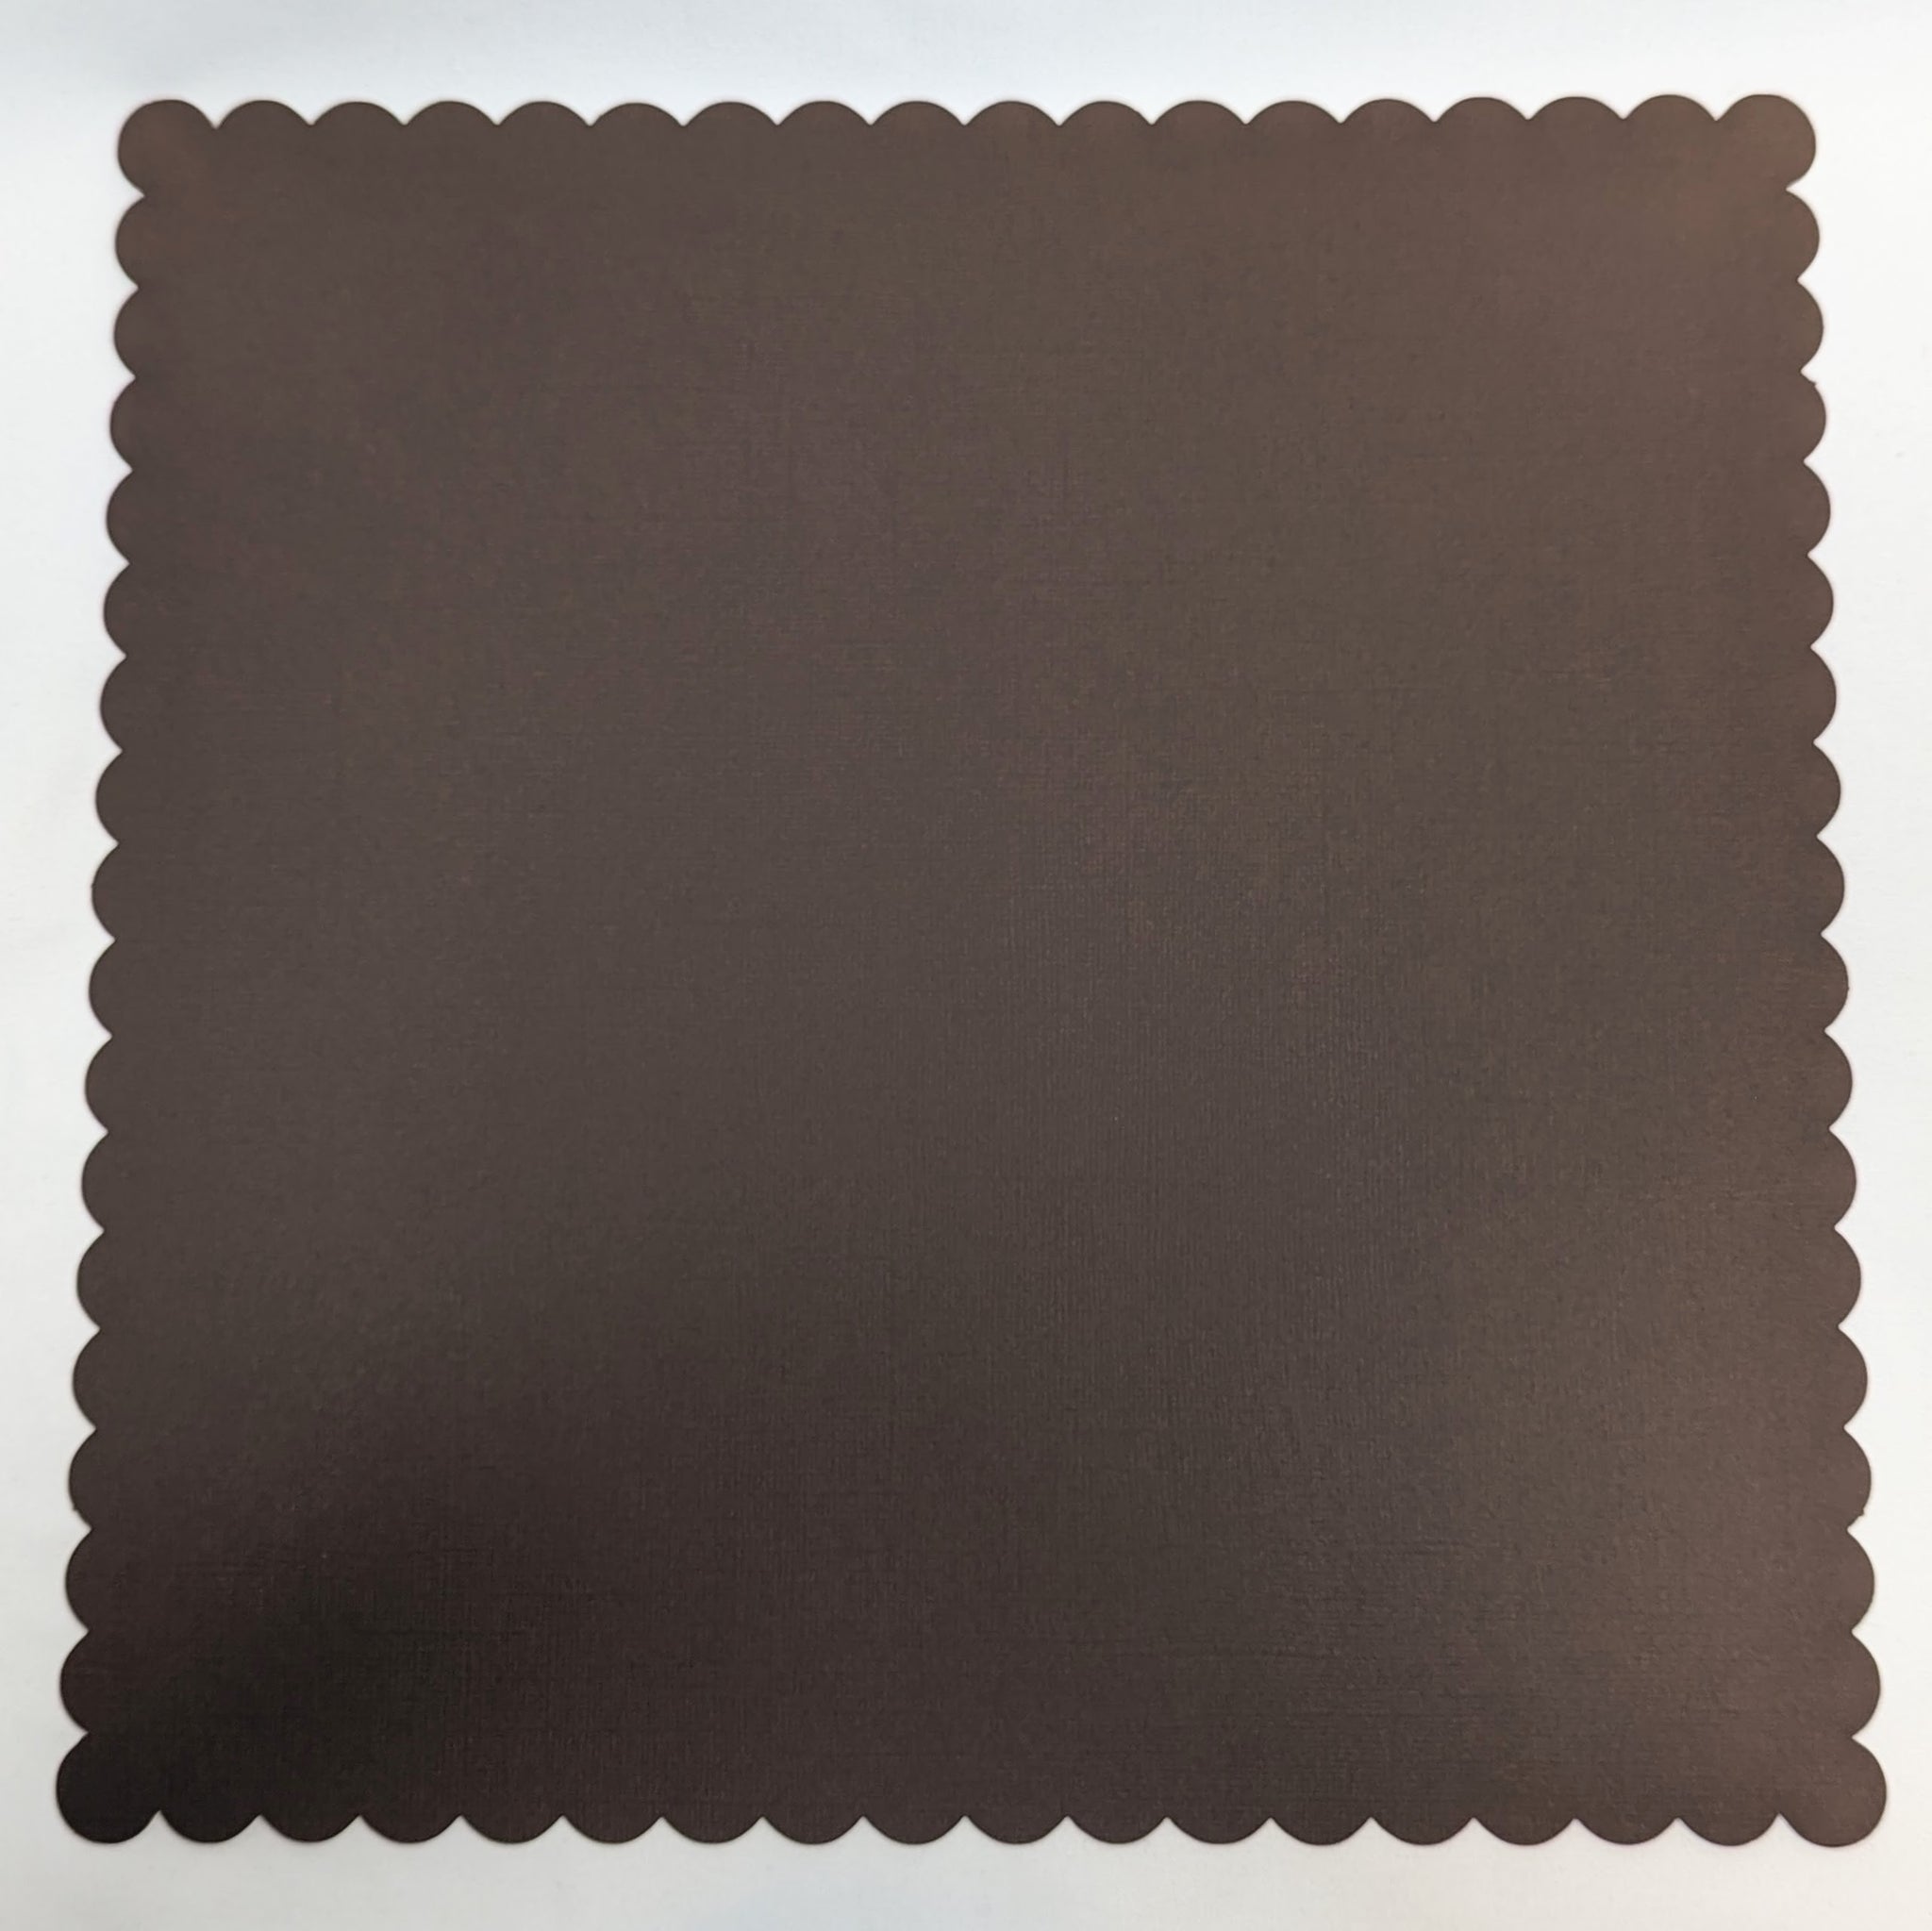 Dark Brown 12x12 Cardstock with a Scalloped Edge